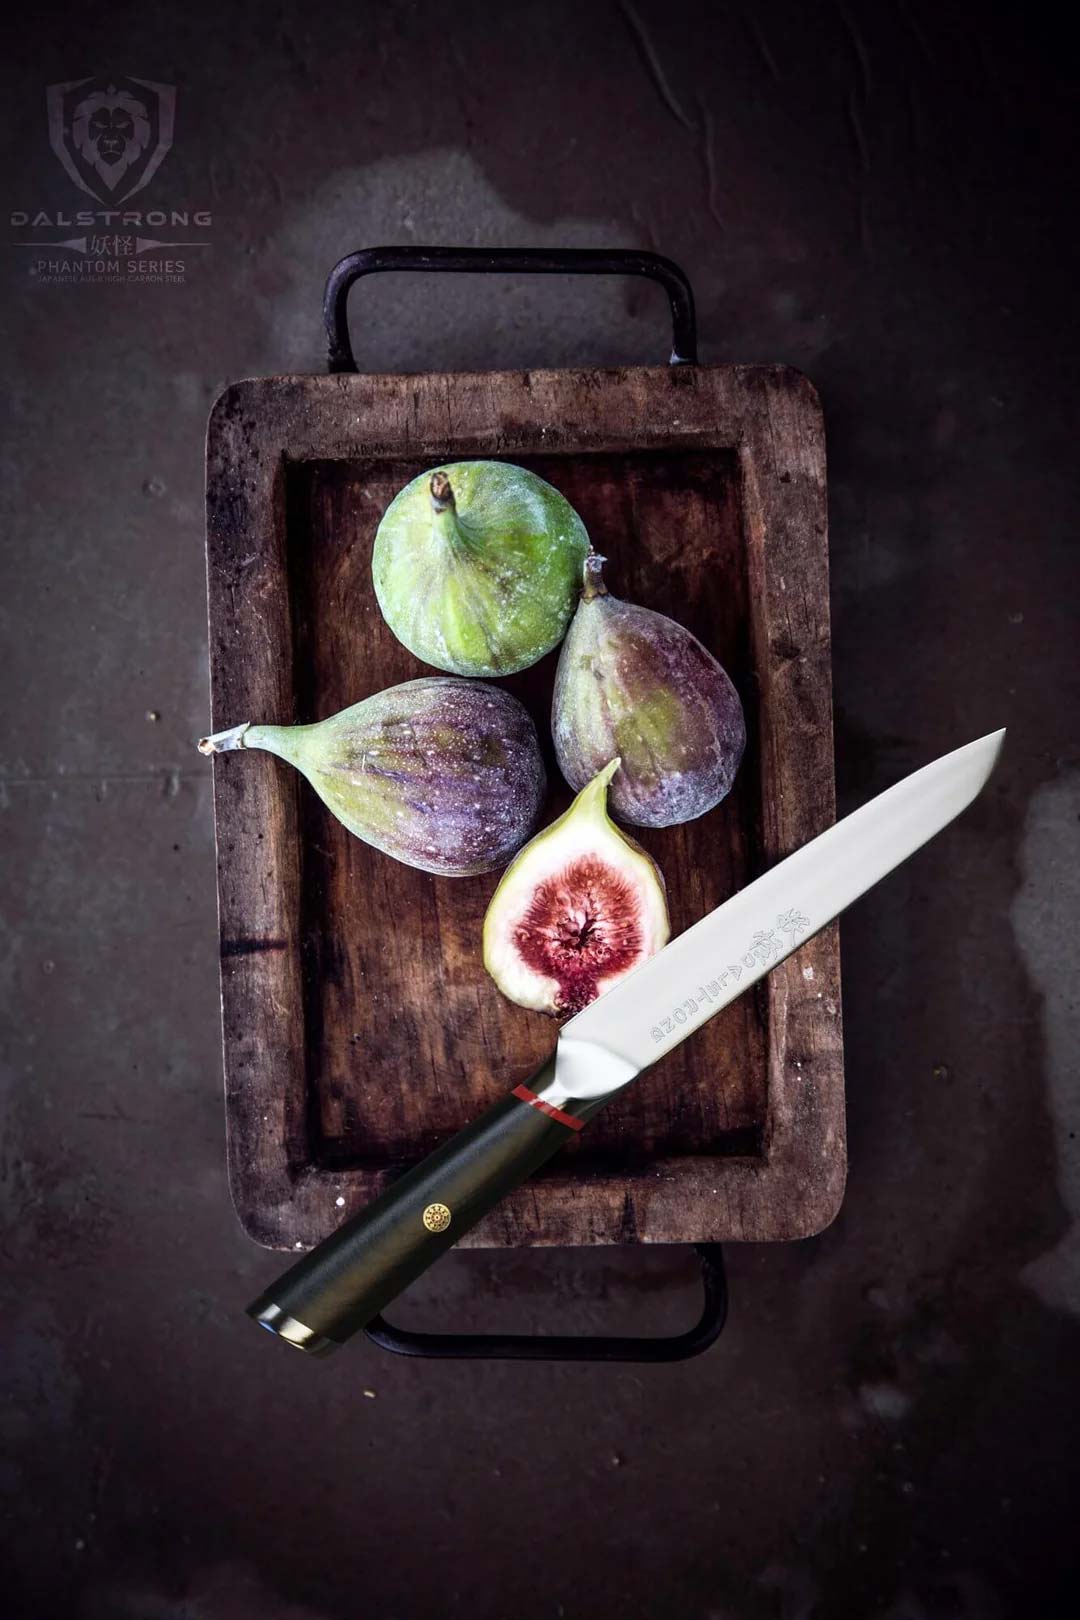 Dalstrong phantom series 5 inch utility knife with pakka wood handle and black sheath beside four fig fruit on a wooden container.